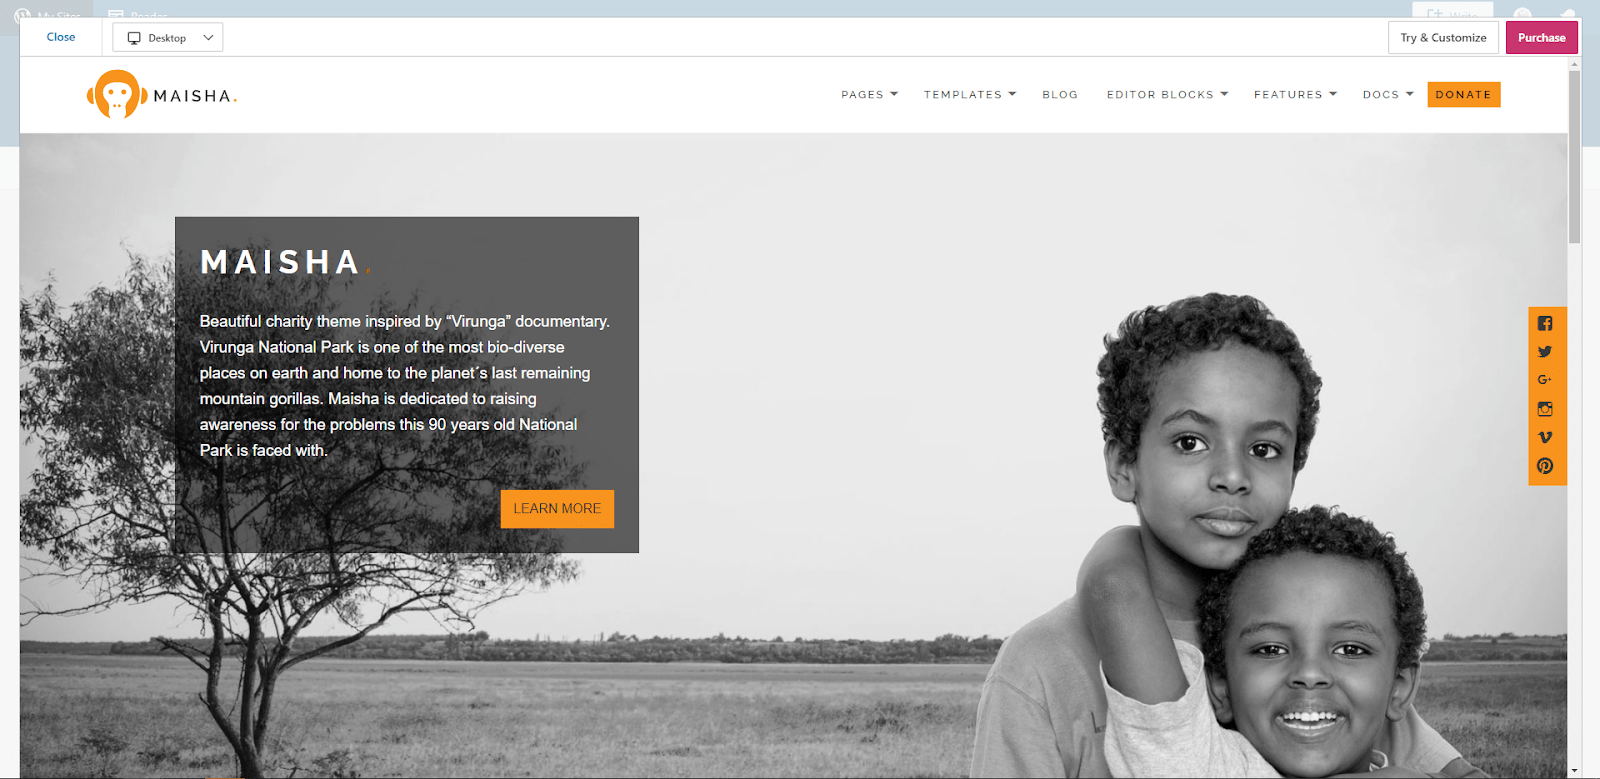 This nonprofit WordPress theme combines the best elements of the previous two examples for a similar look to both of them.